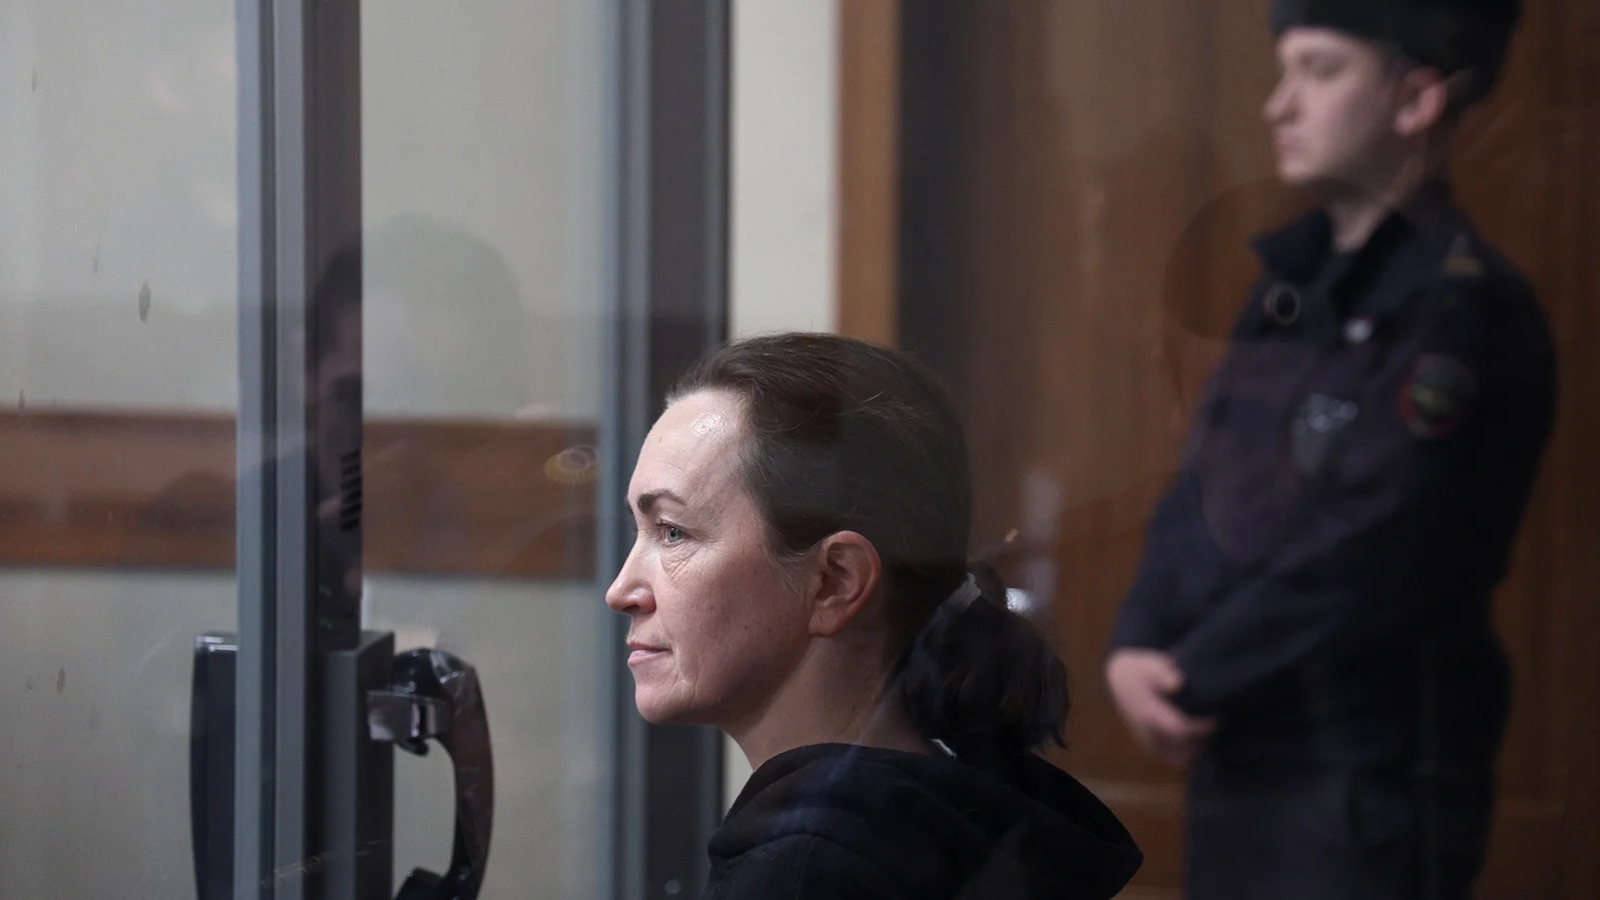 Alsou Kurmasheva, a journalist of the Tatar-Bashkort service of Radio Liberty  has been in custody for more than 100 days